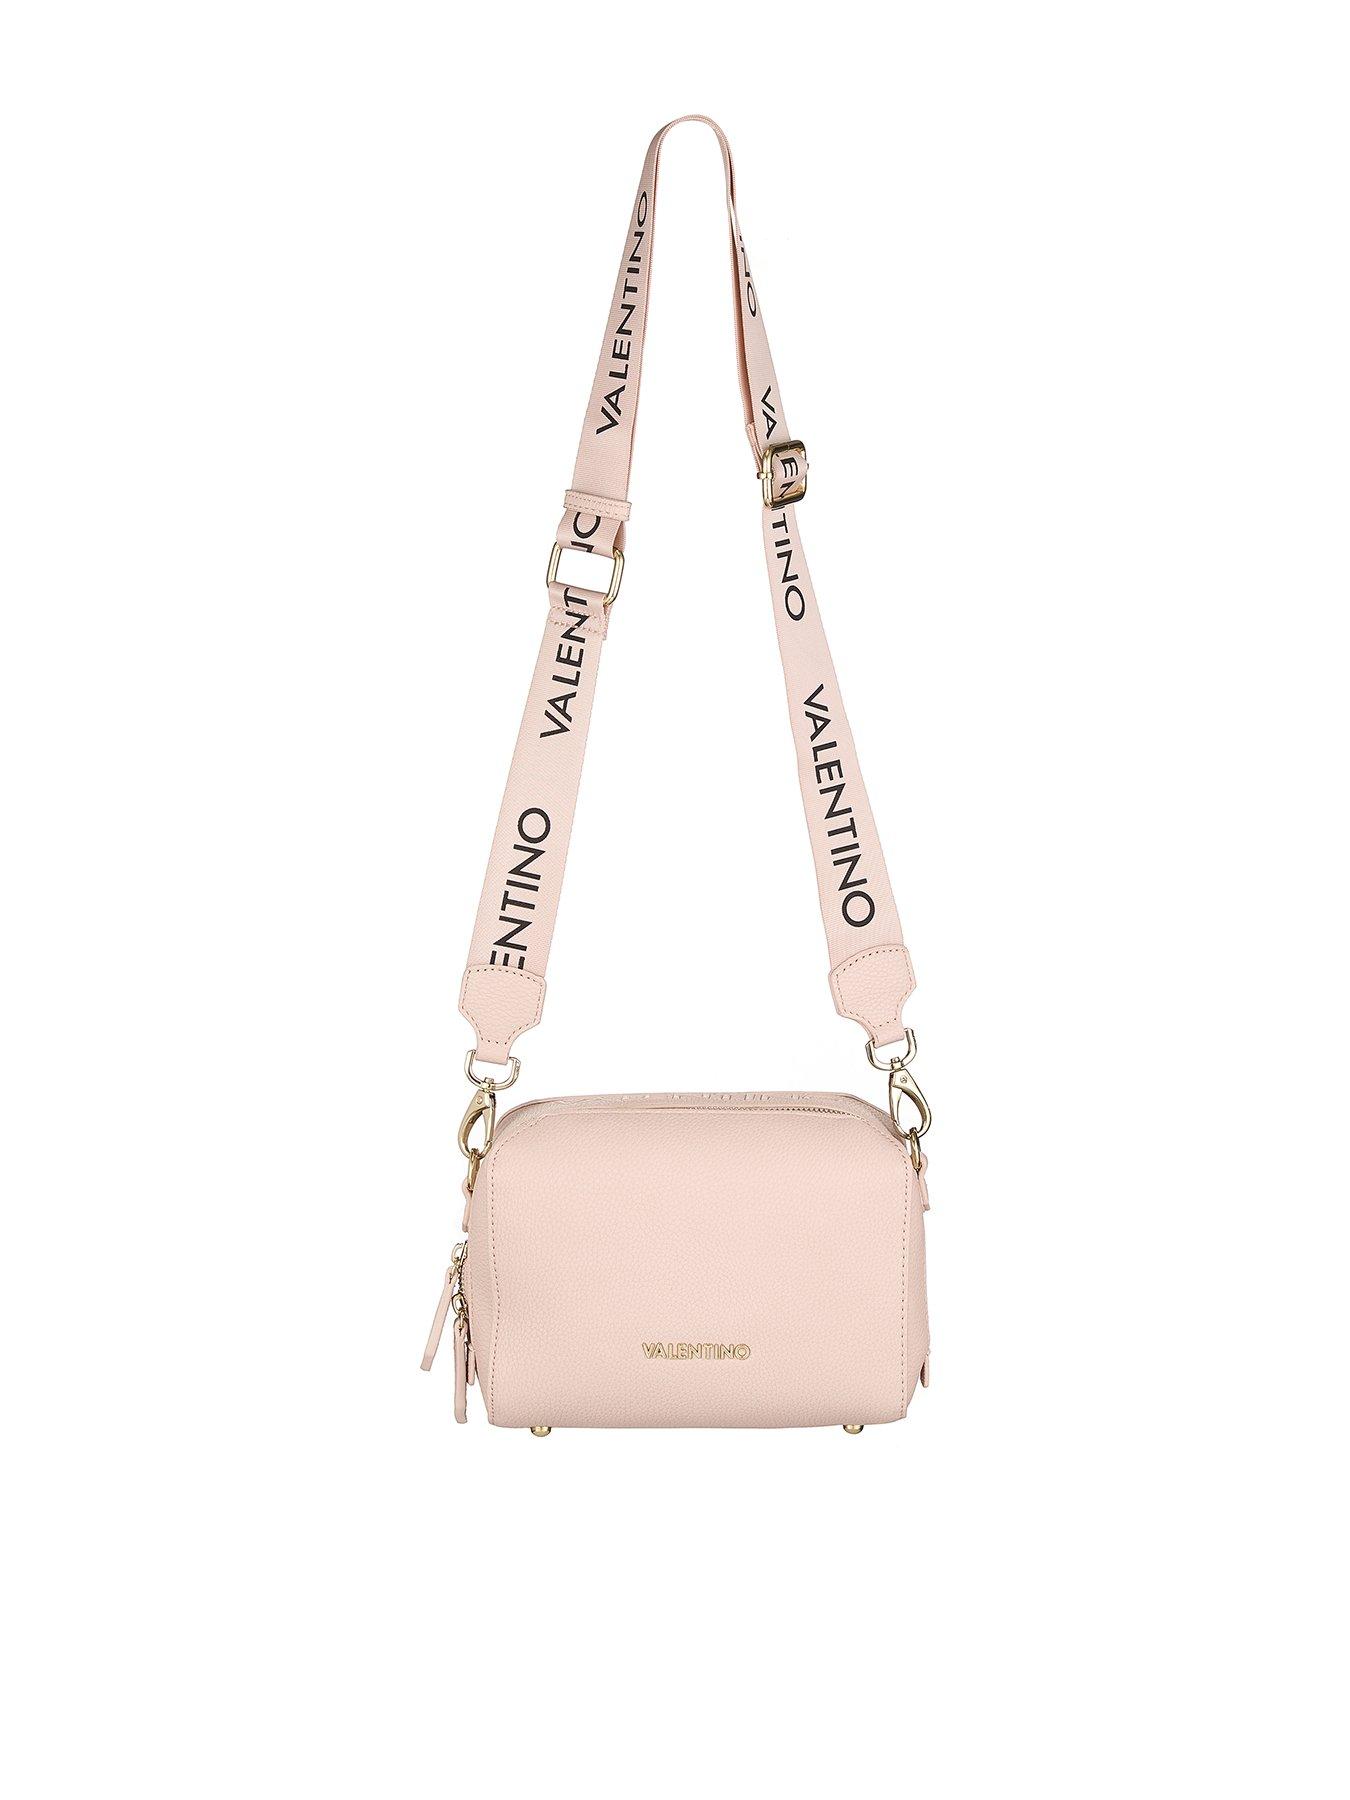 Valentino Bags PATTIE - Across body bag - fuxia/pink 